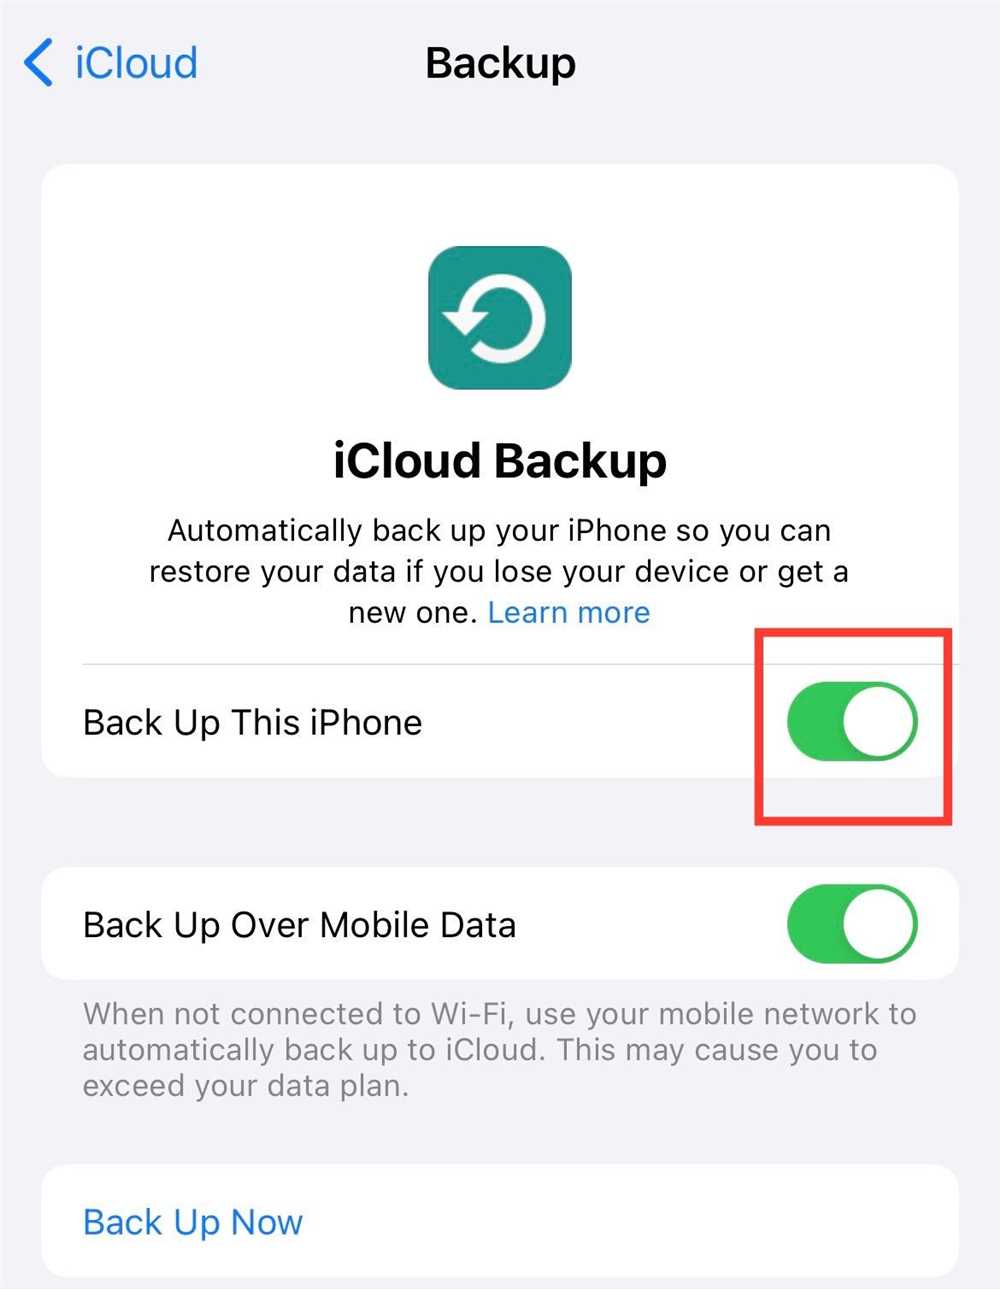 5. Secure Your Device and Internet Connection